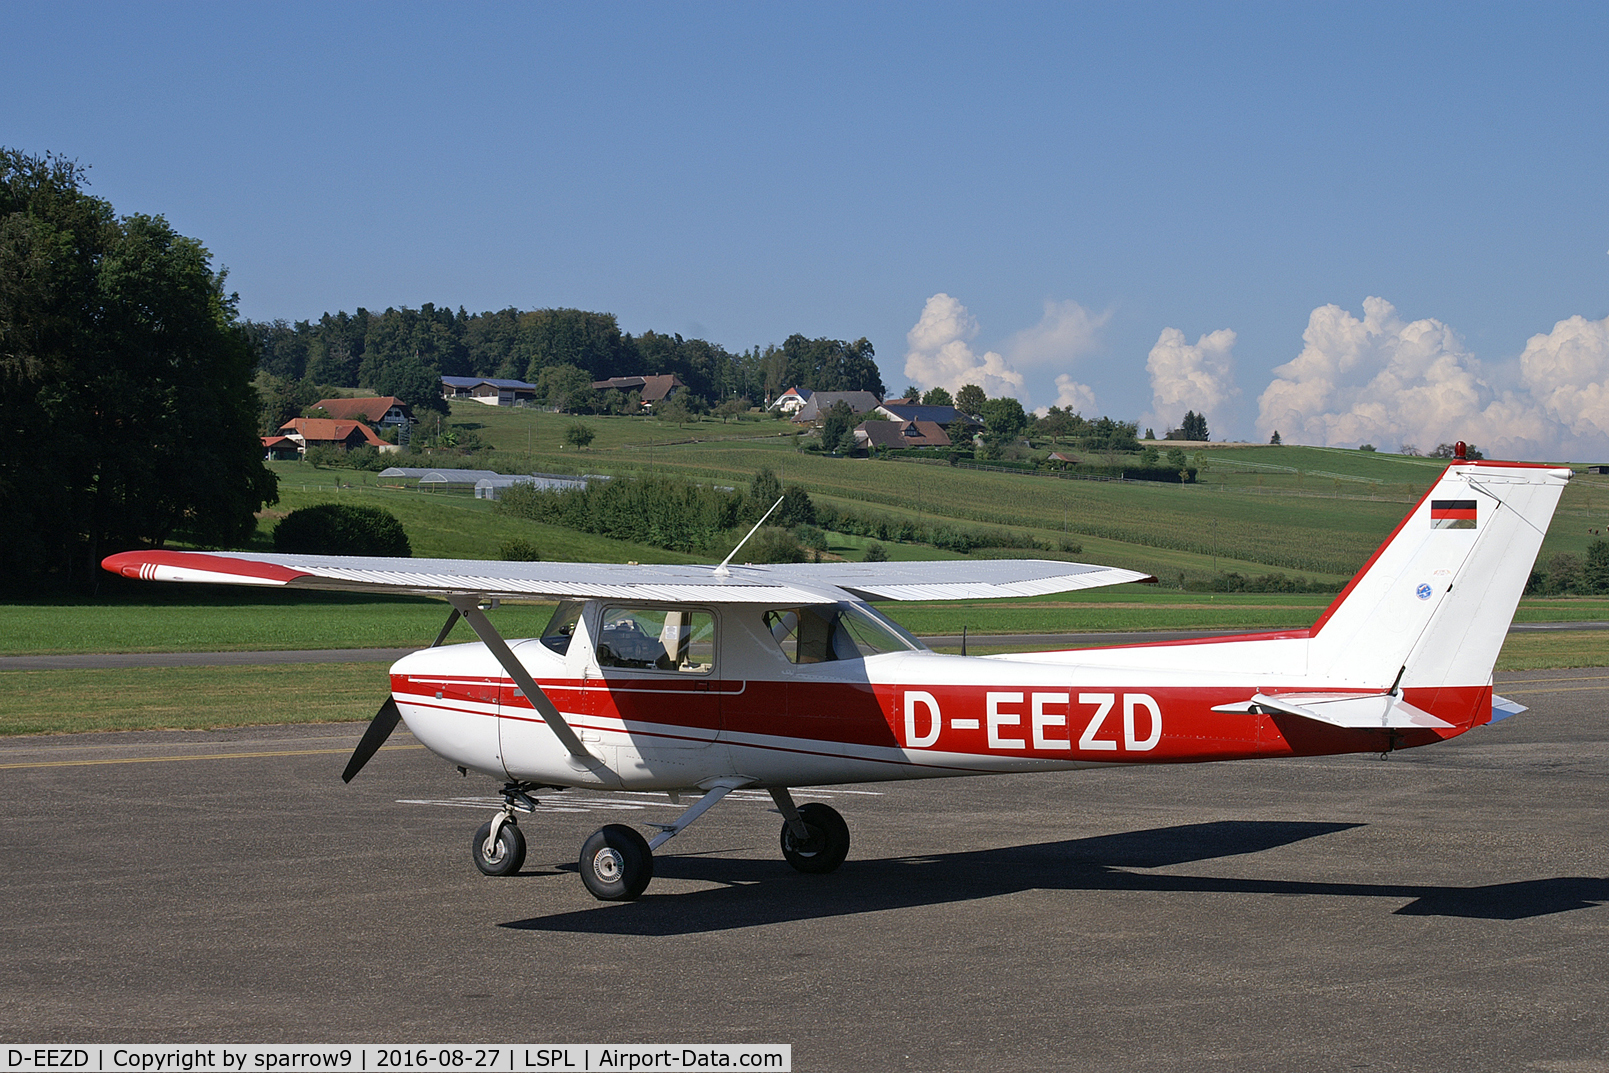 D-EEZD, 1972 Reims FRA150L Aerobat C/N FRA1500159, A visitor to the Piper-Meeting